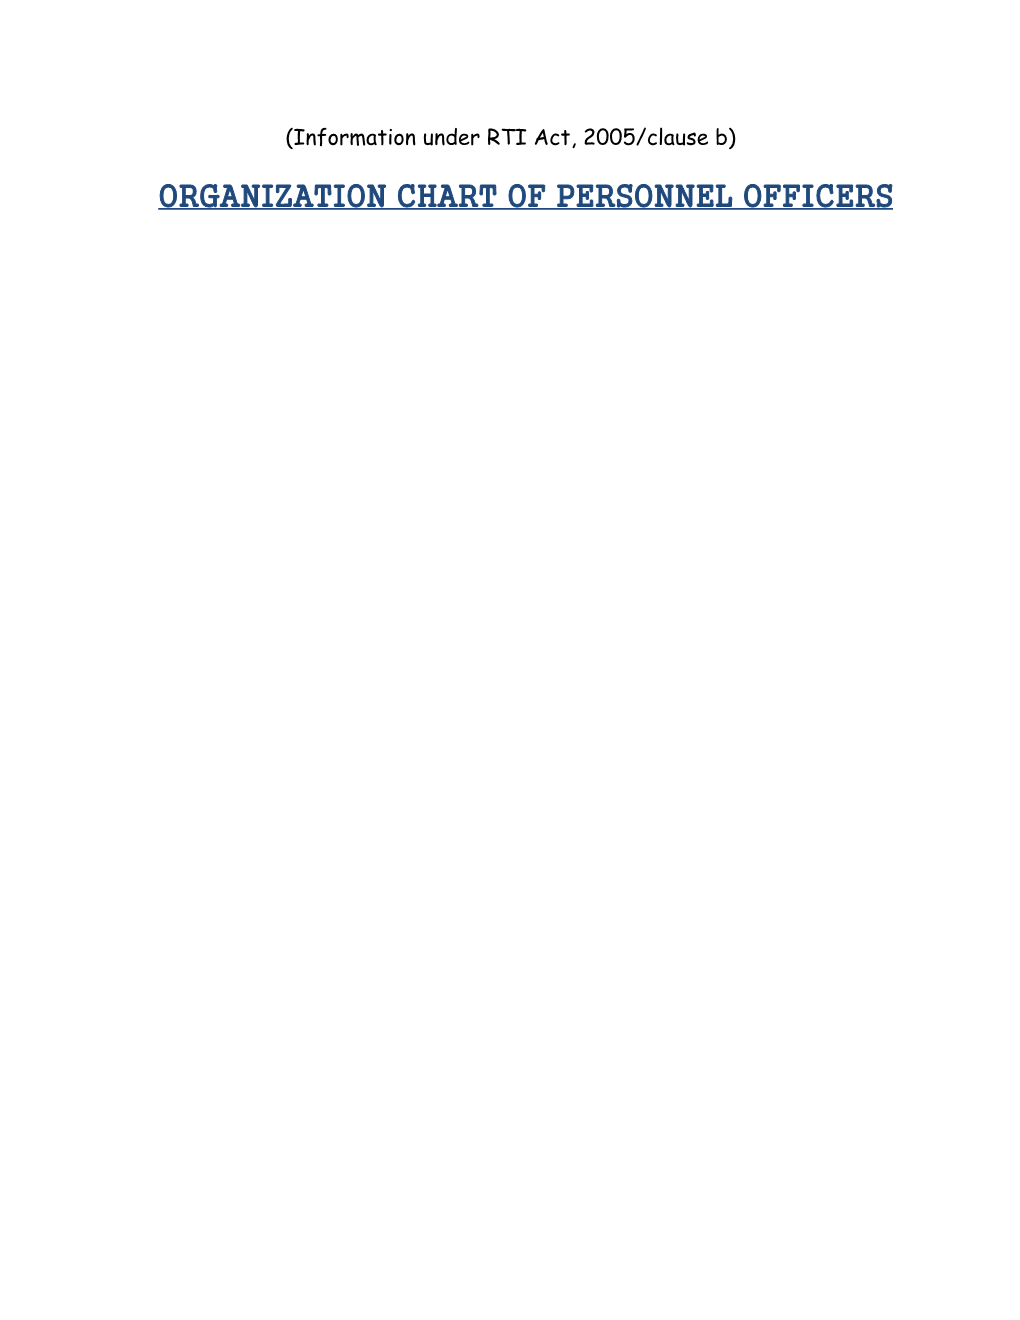 Organization Chart of Personnel Officers